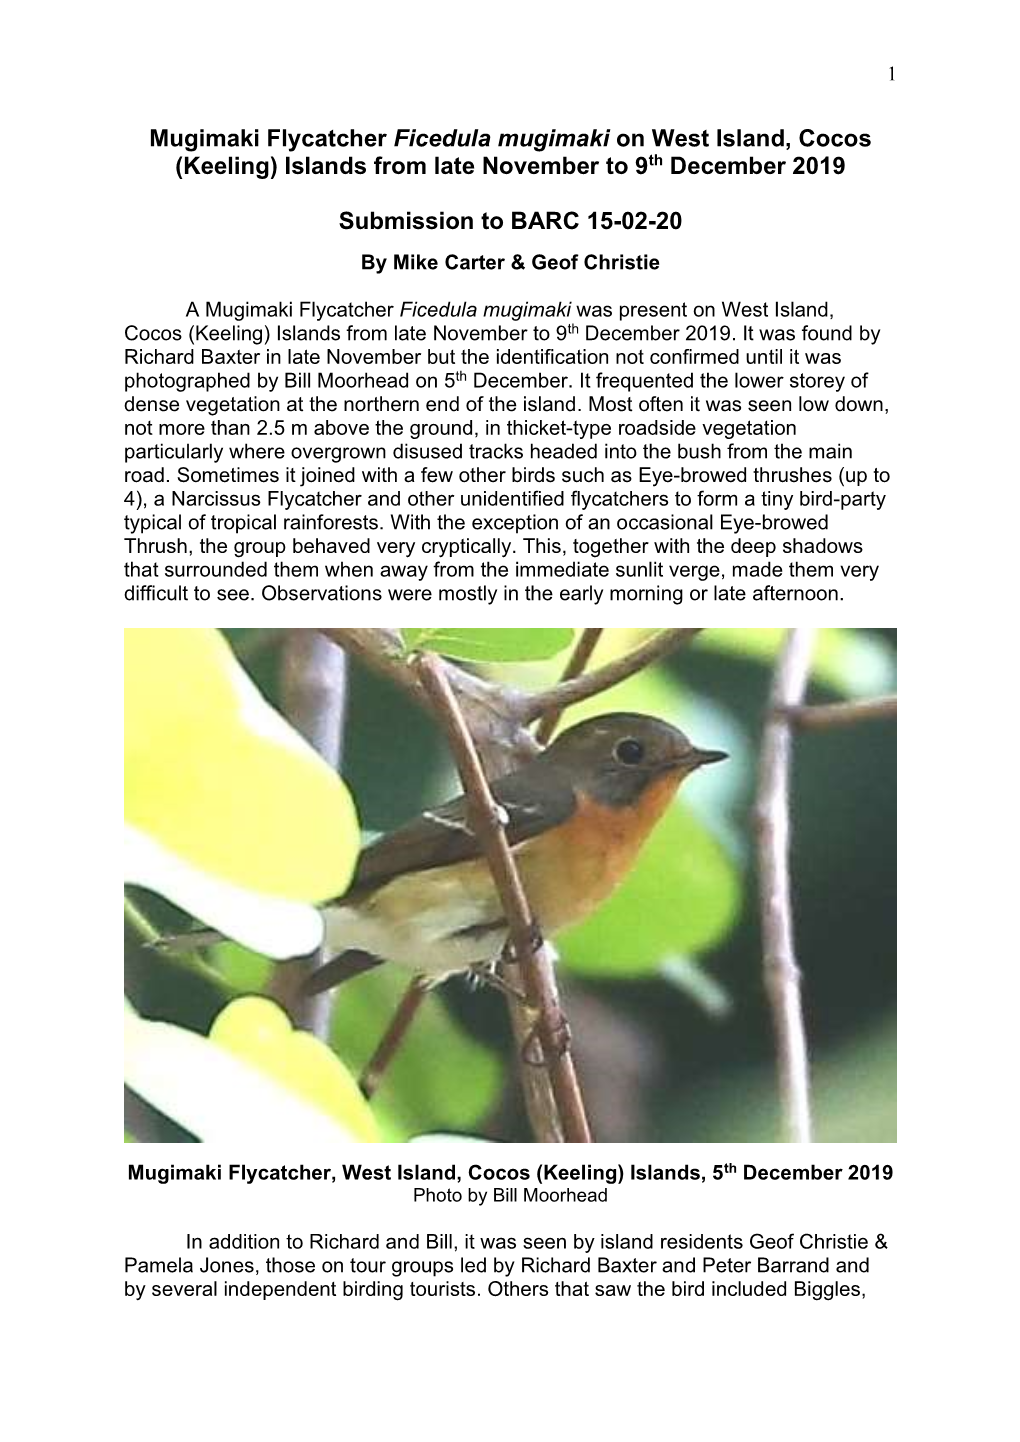 Mugimaki Flycatcher Ficedula Mugimaki on West Island, Cocos (Keeling) Islands from Late November to 9Th December 2019